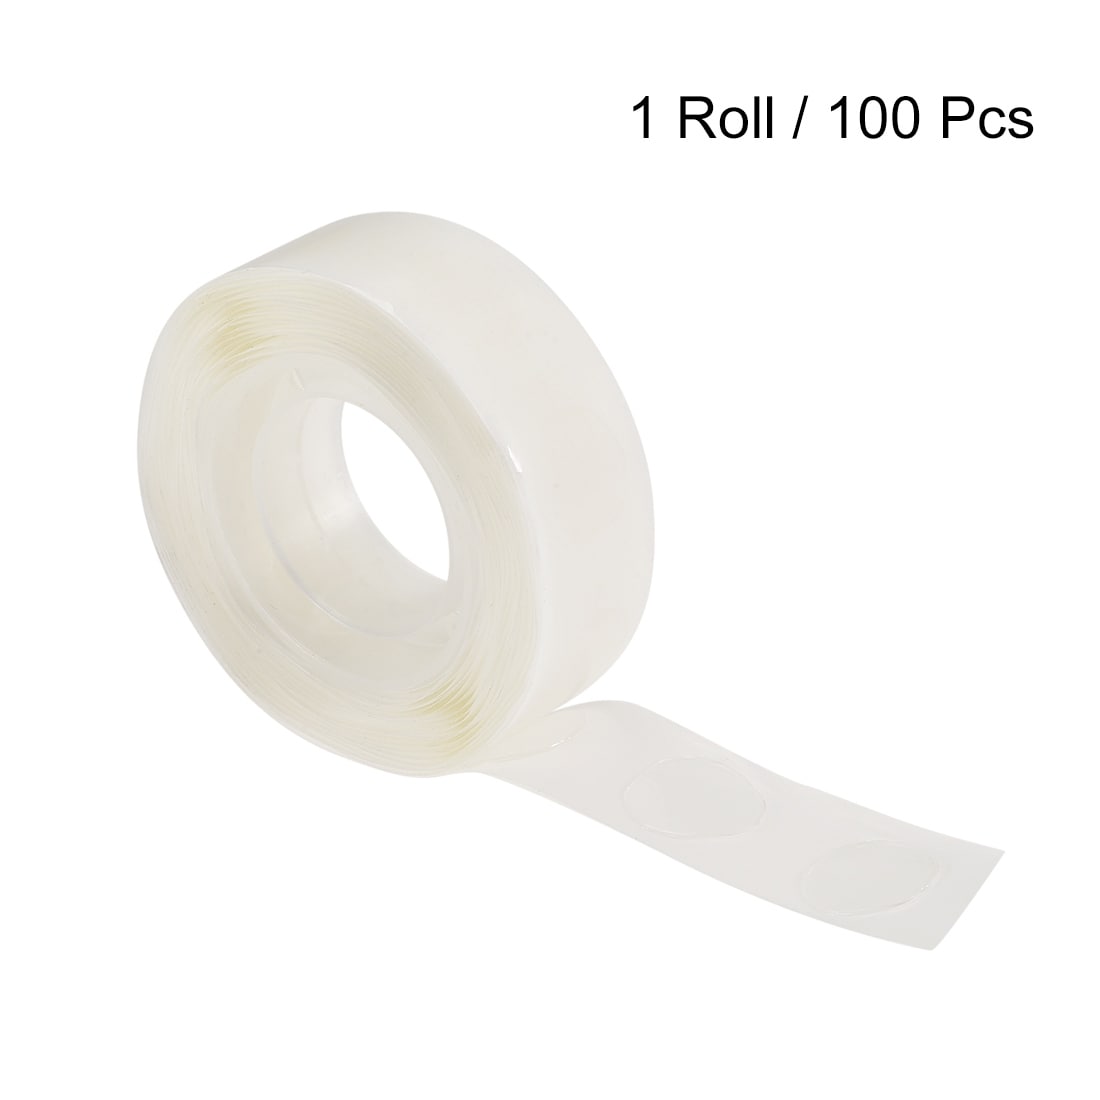 Glue Point 12mm, 2 Sided Adhesive Tape for Crafts, 1 Roll/100 Pcs - Clear